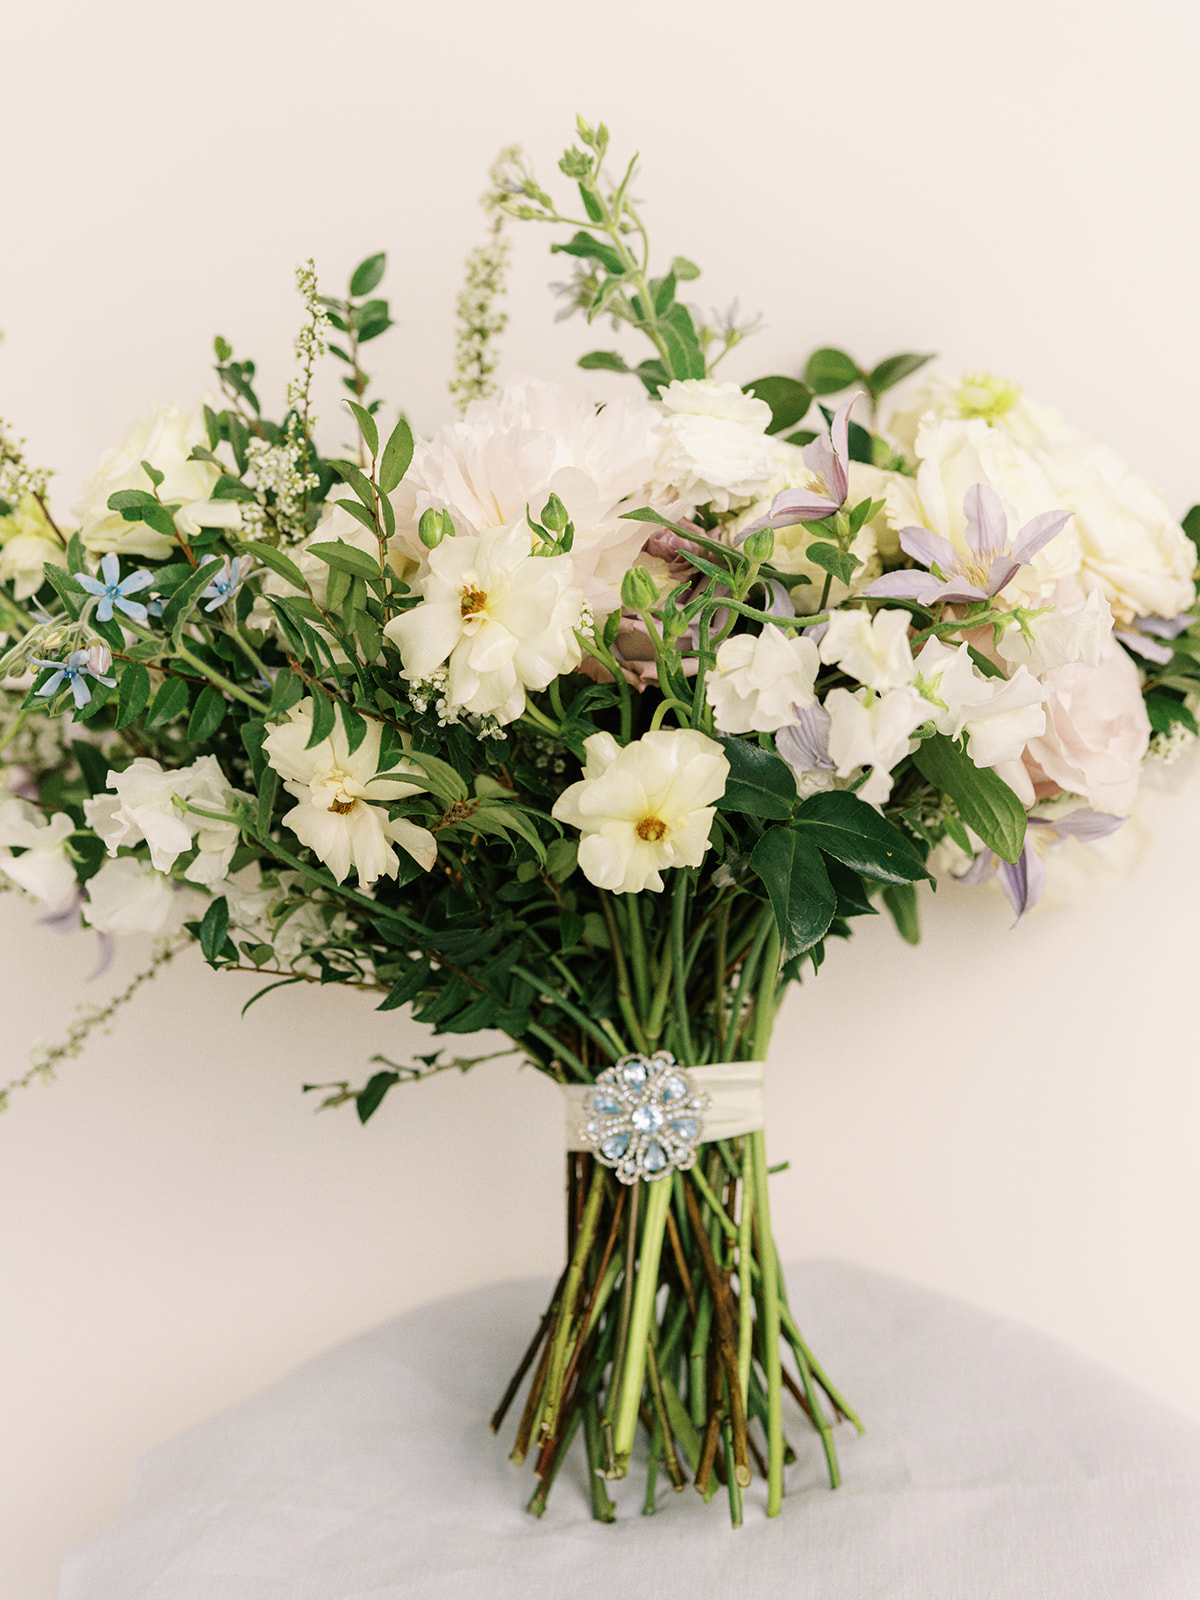 Classic white, green, and lavender garden inspired bridal bouquet with peonies, roses, clematis, spirea, butterfly ranunculus, and ranunculus florals. Spring church wedding large lush bridal bouquet. Design by Rosemary and Finch Floral Design in Nashville, TN.